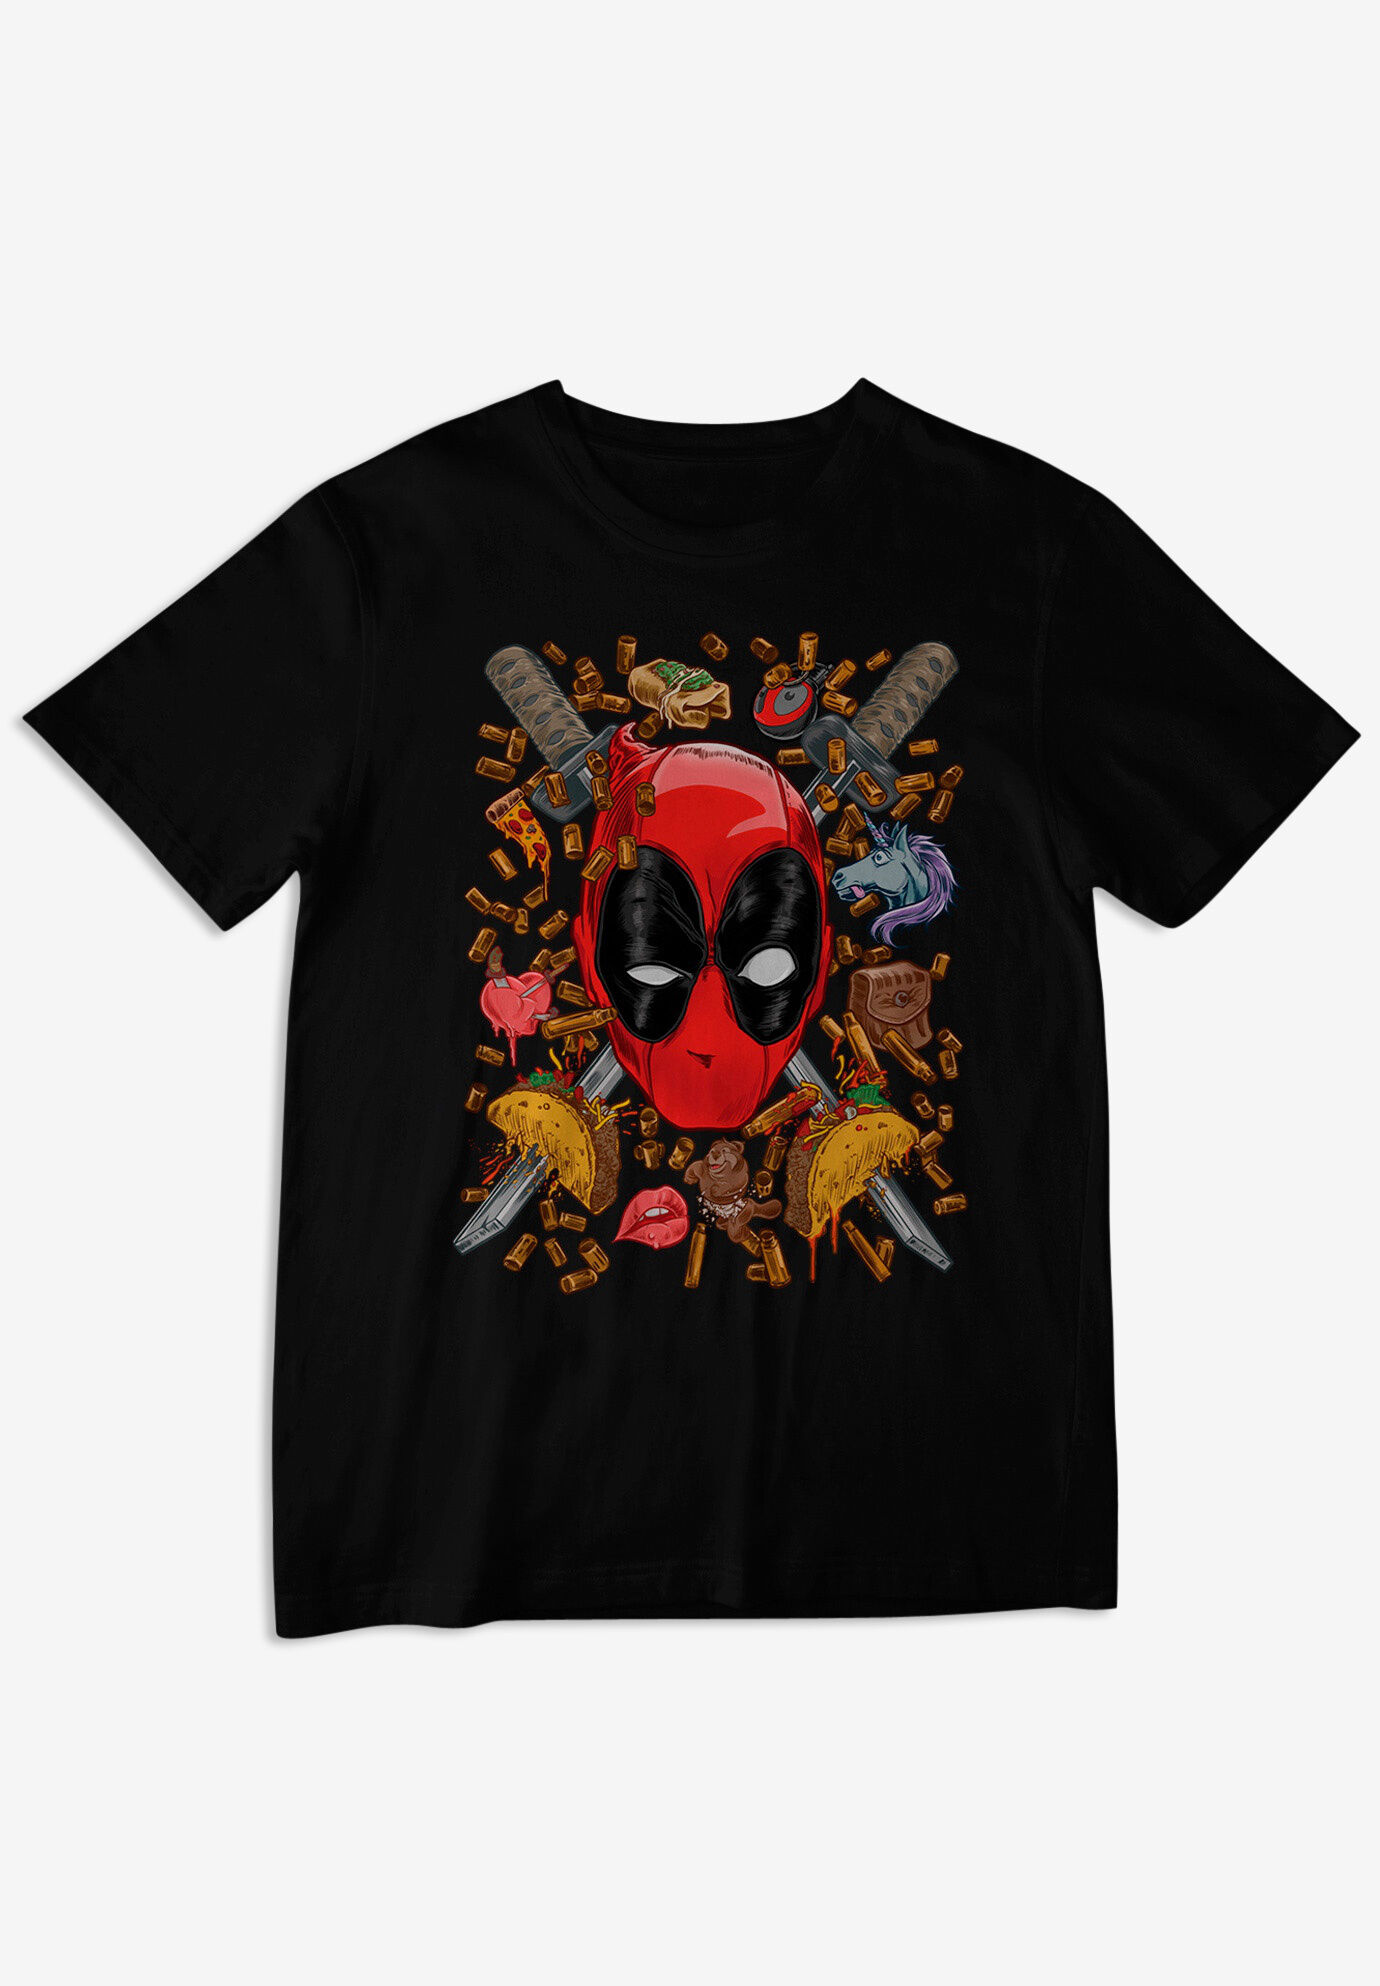 Marvel® Comic Graphic Tee | King Size